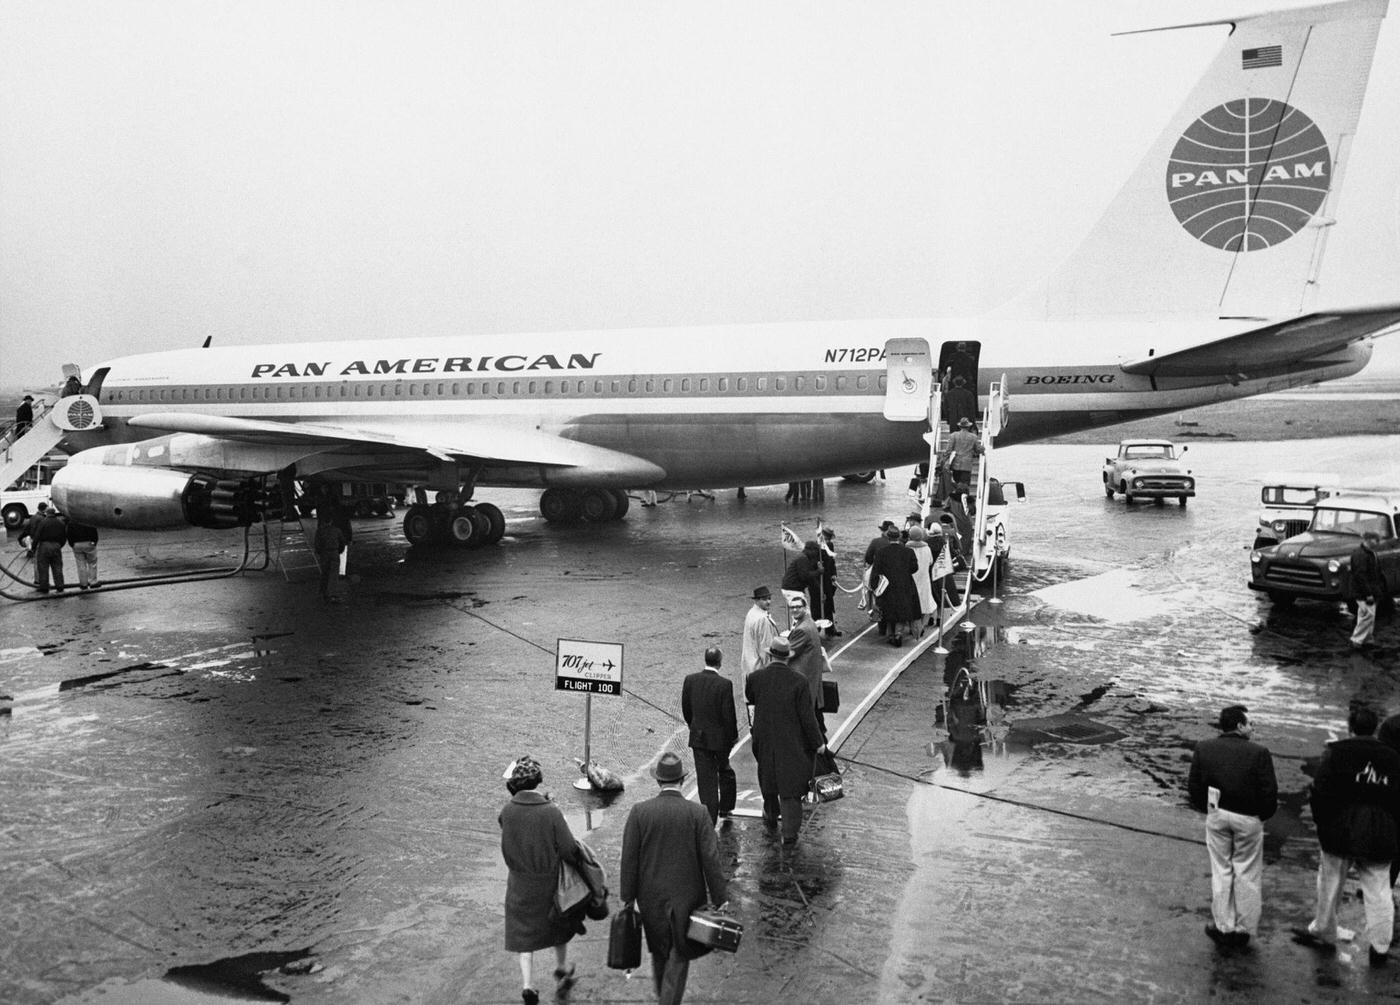 Passengers boarding the jet service to Paris from the Pan American World Airways 707 Jet Clipper, which inaugurated the airline's Trans Atlantic services to London on October 26, 1958.